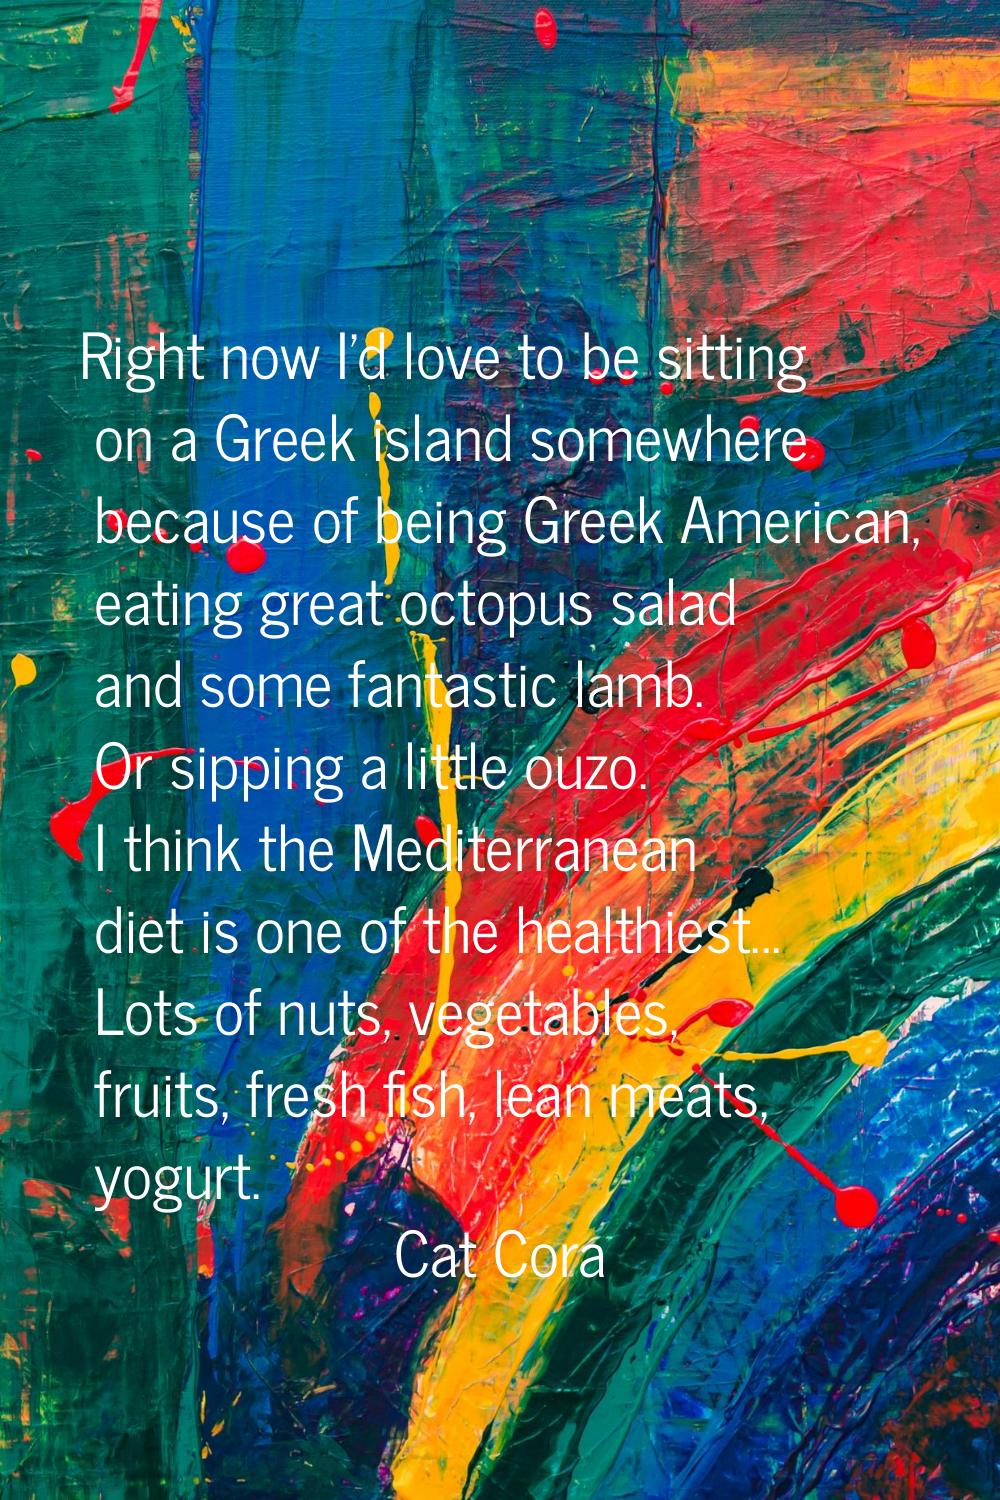 Right now I'd love to be sitting on a Greek island somewhere because of being Greek American, eatin